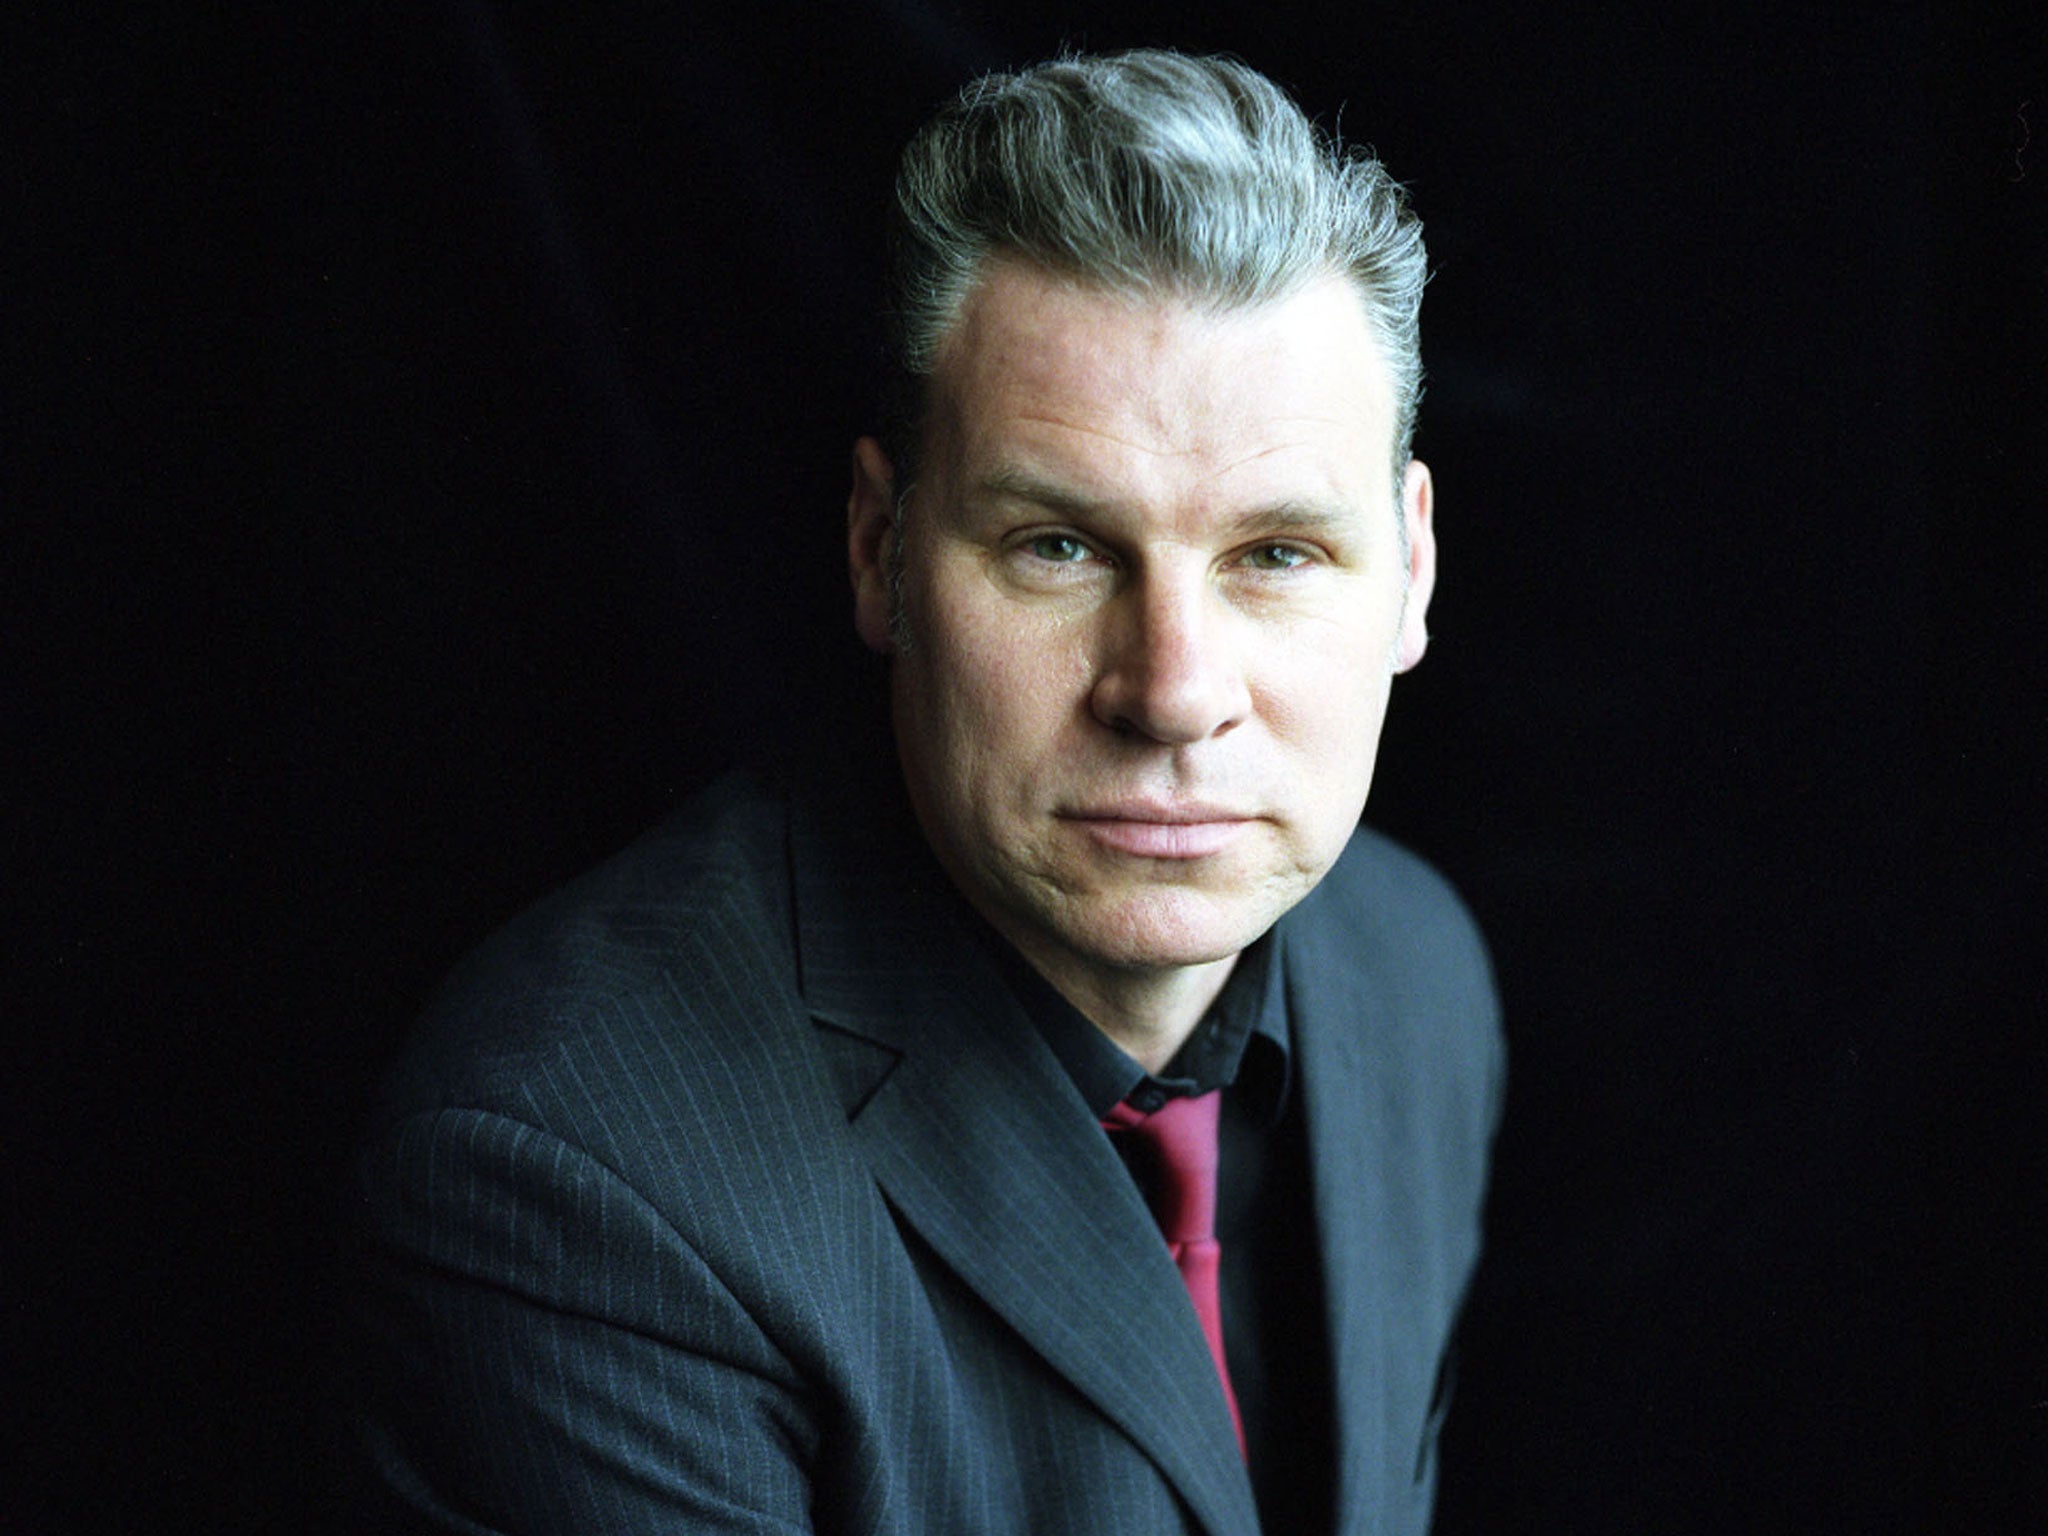 Mark Kermode discusses the latest film releases on his Friday film show ‘Kermode & Mayo’ on Radio 5 Live